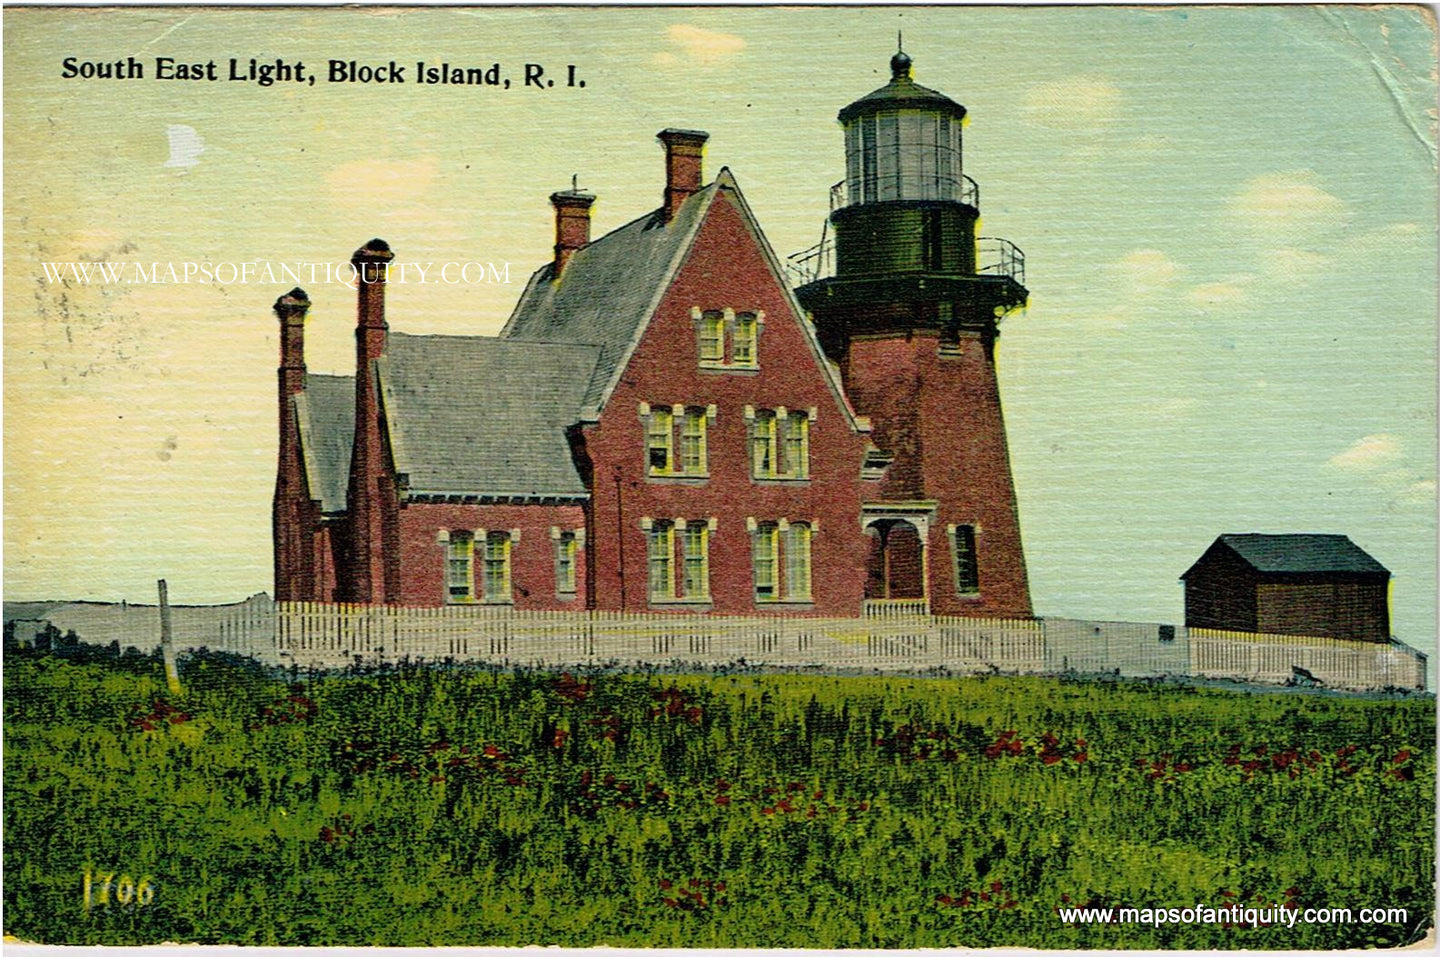 Antique-Colored-Postcard-South-East-Light-Block-Island-Rhode-Island---Postcard-Postcard-Rhode-Island-1907-1914-Charles-H-Seddon-Maps-Of-Antiquity